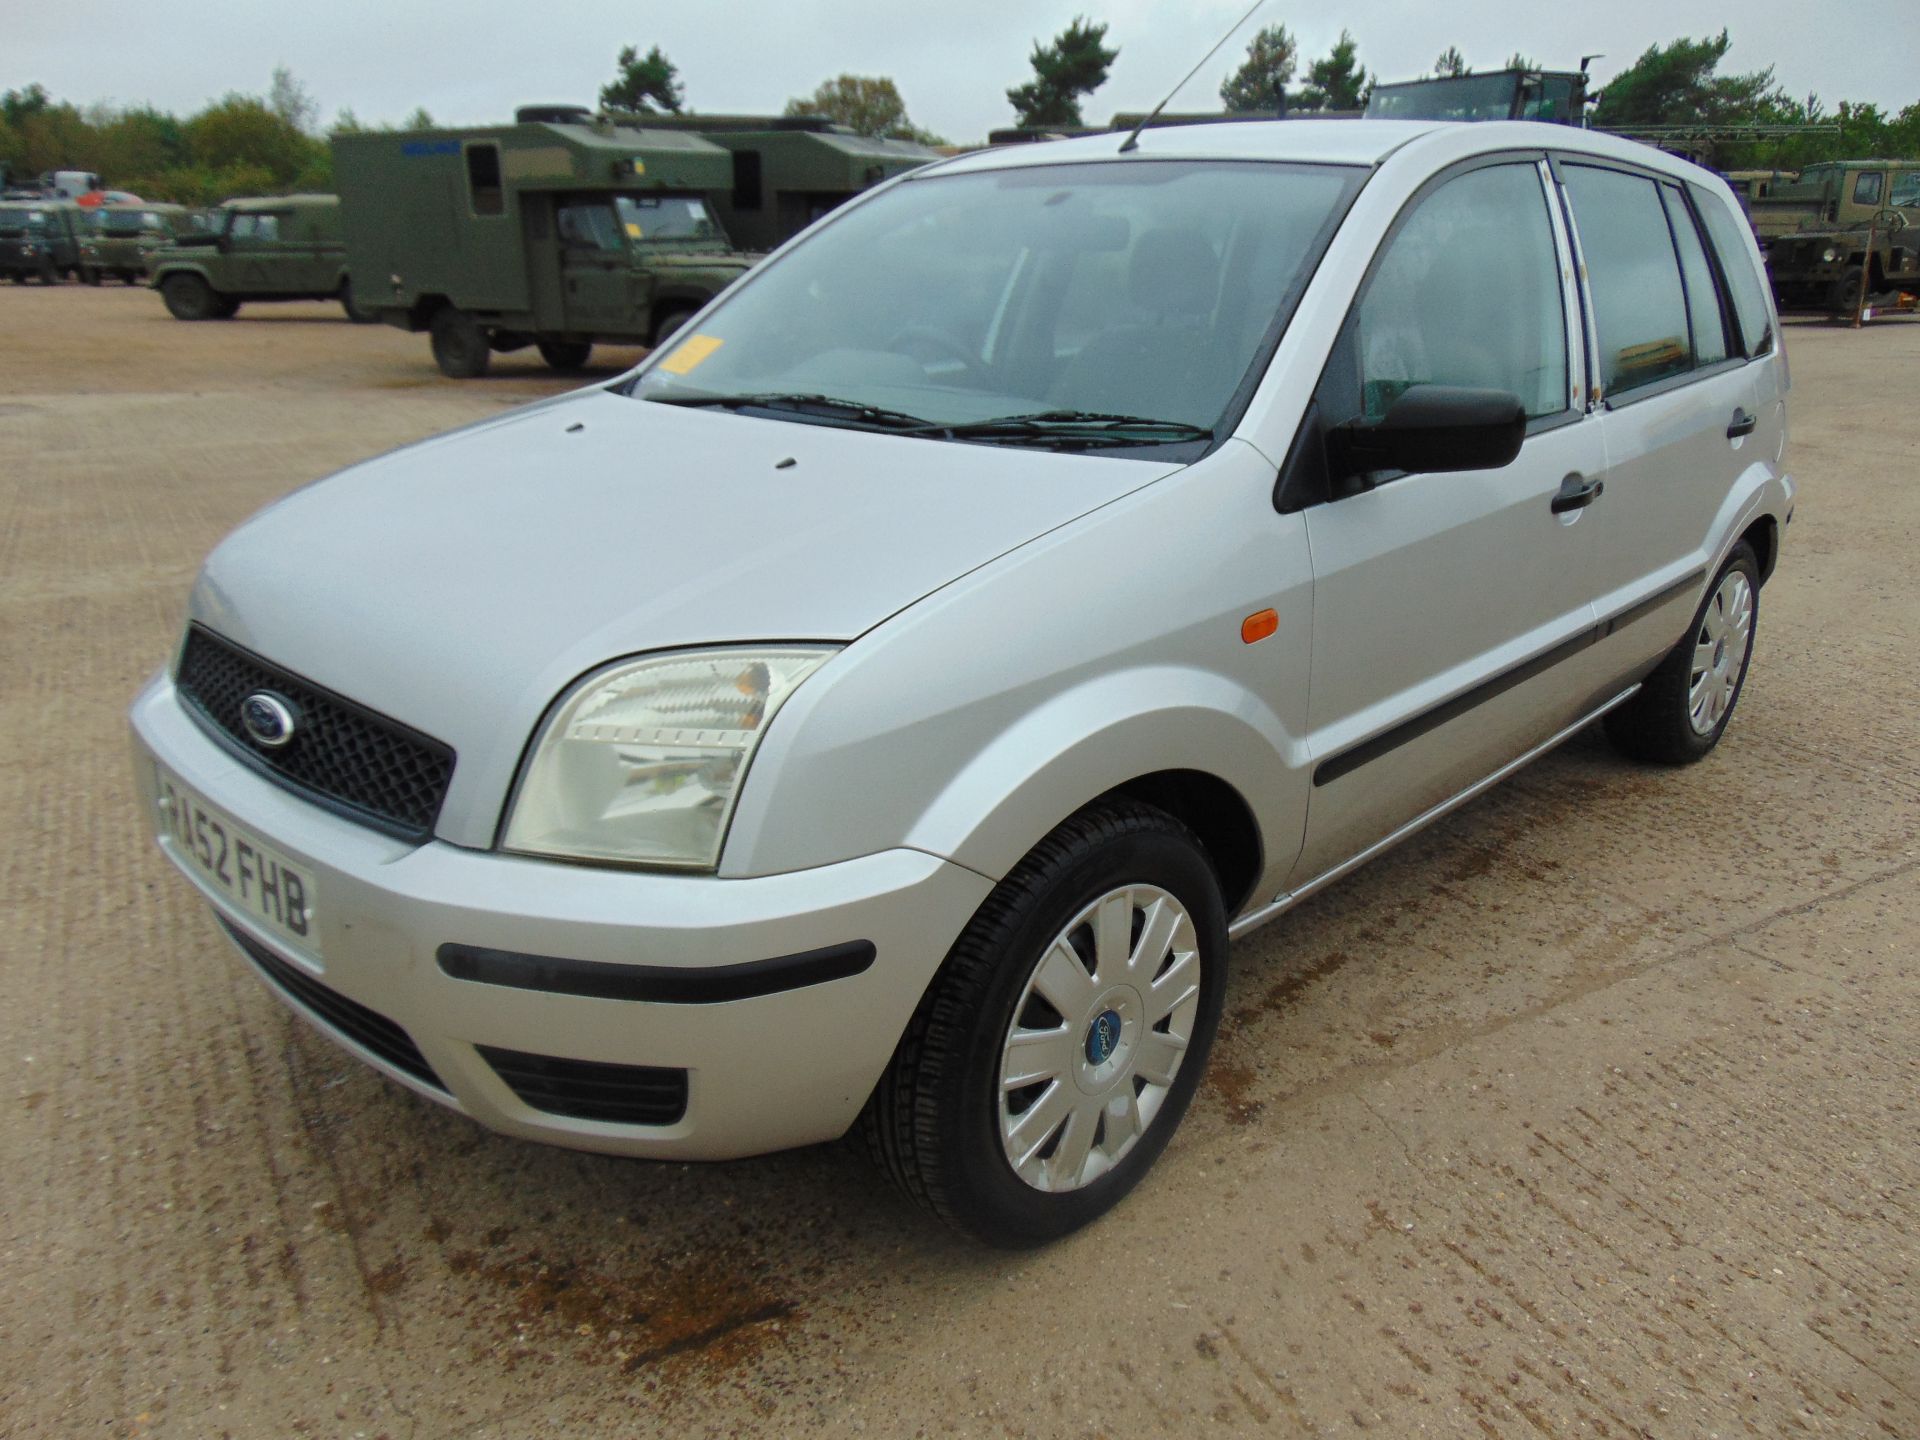 Ford Fusion 1.4 TDCi - Image 3 of 17